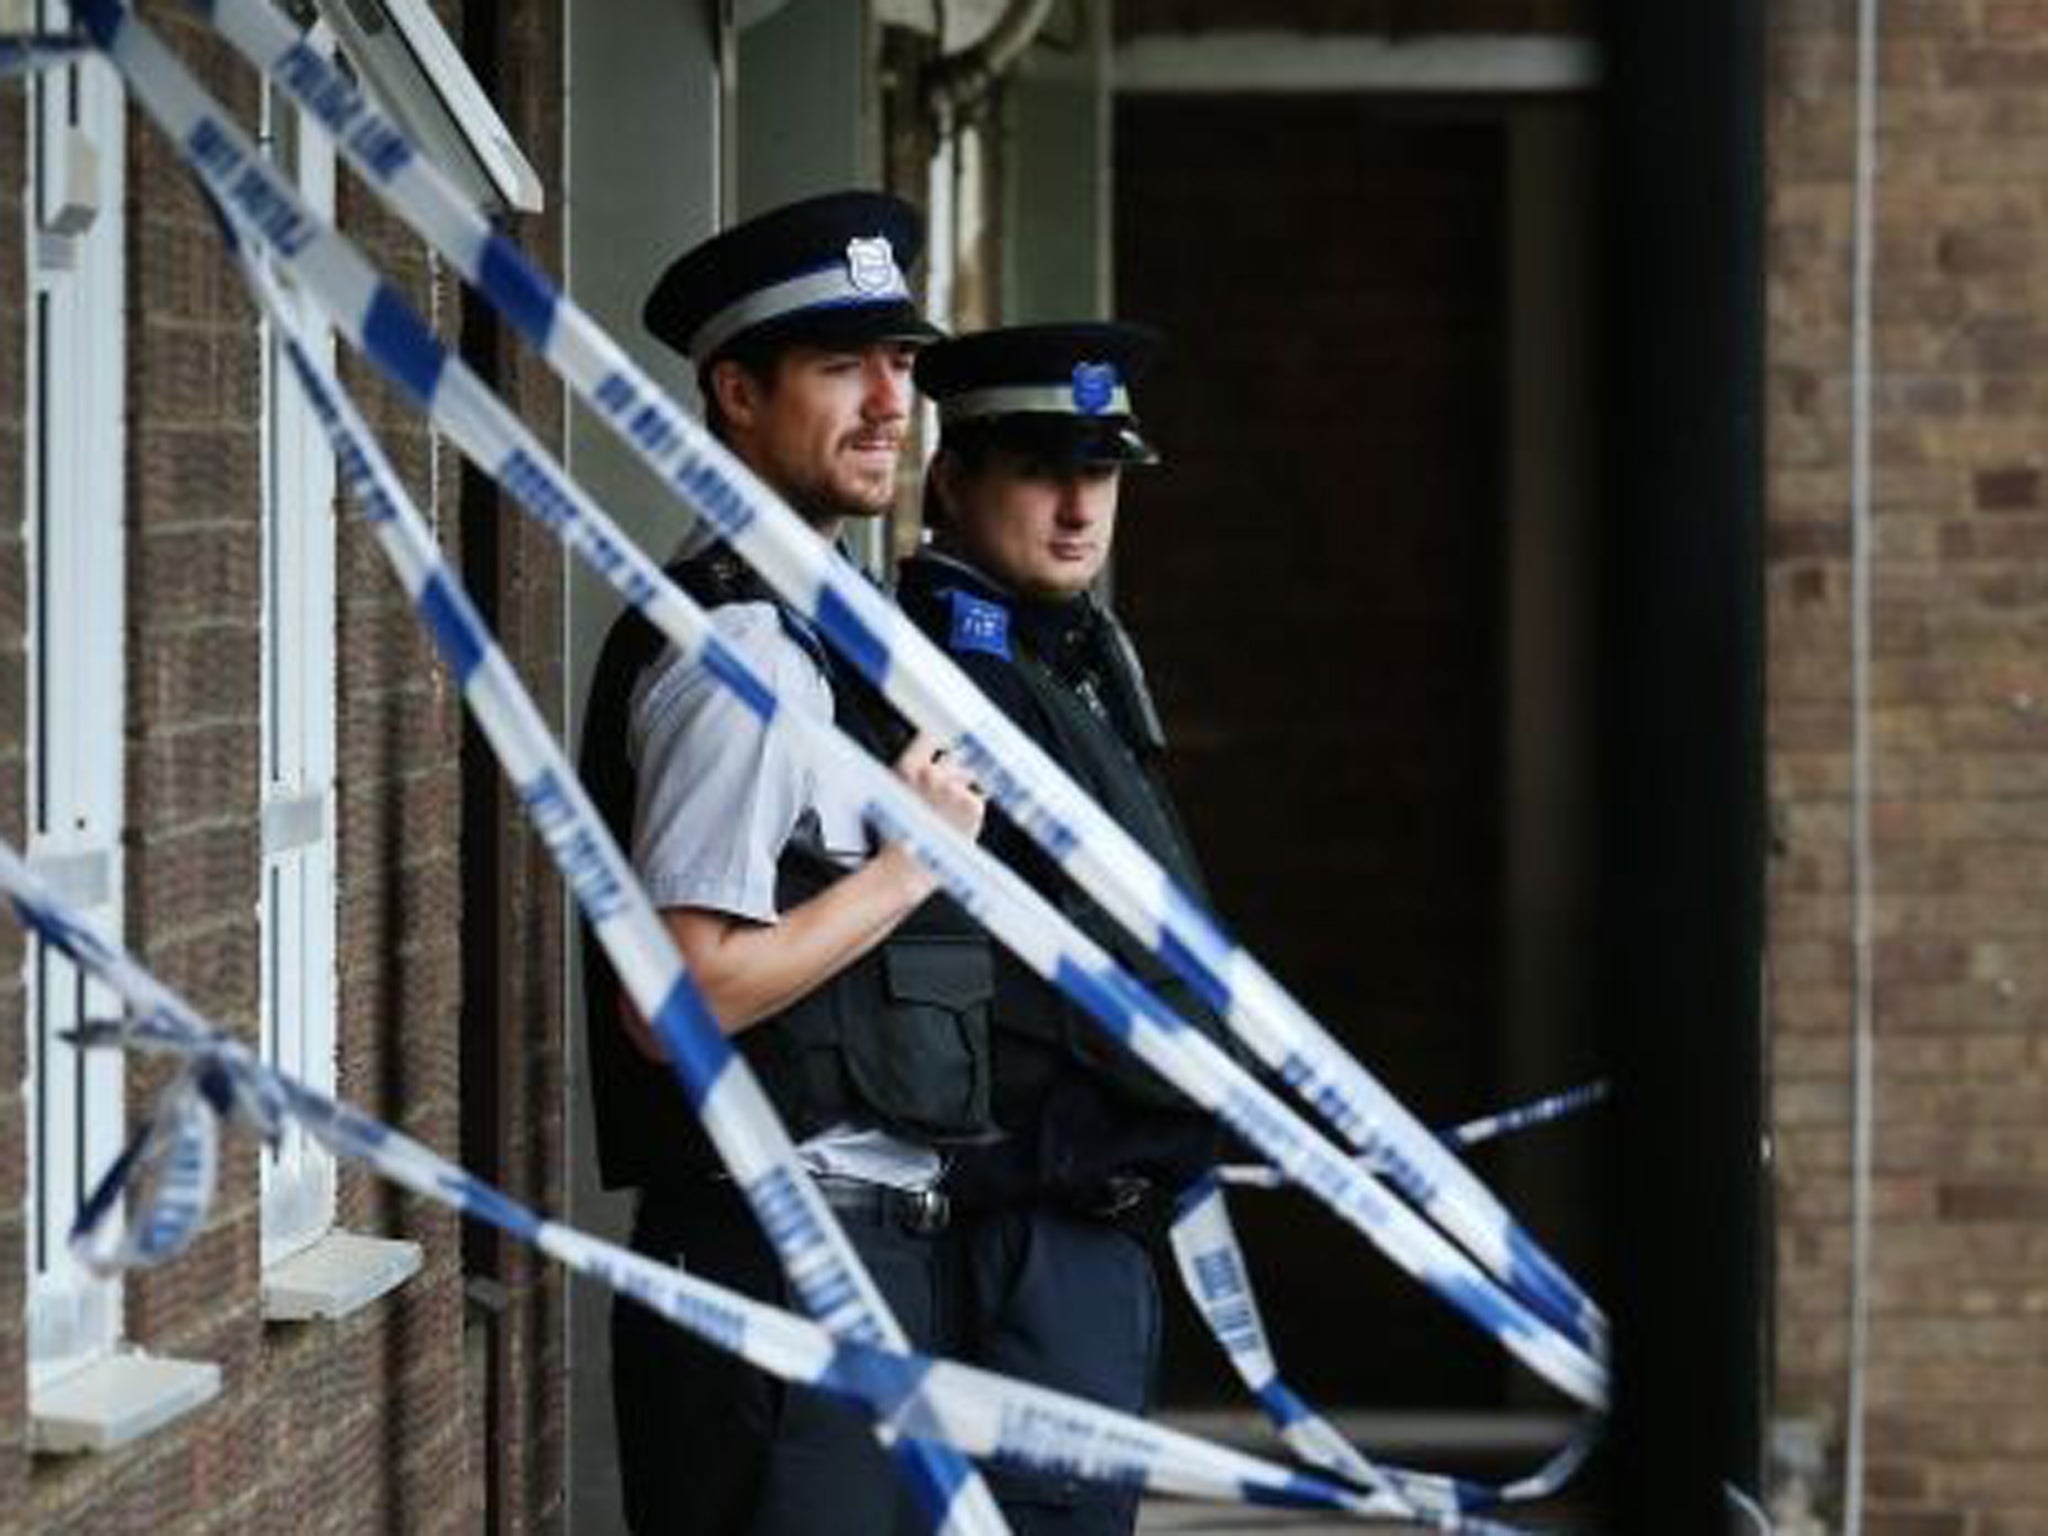 Community support officers stand guard at an address in Elstead House where police are investigating a stabbing incident